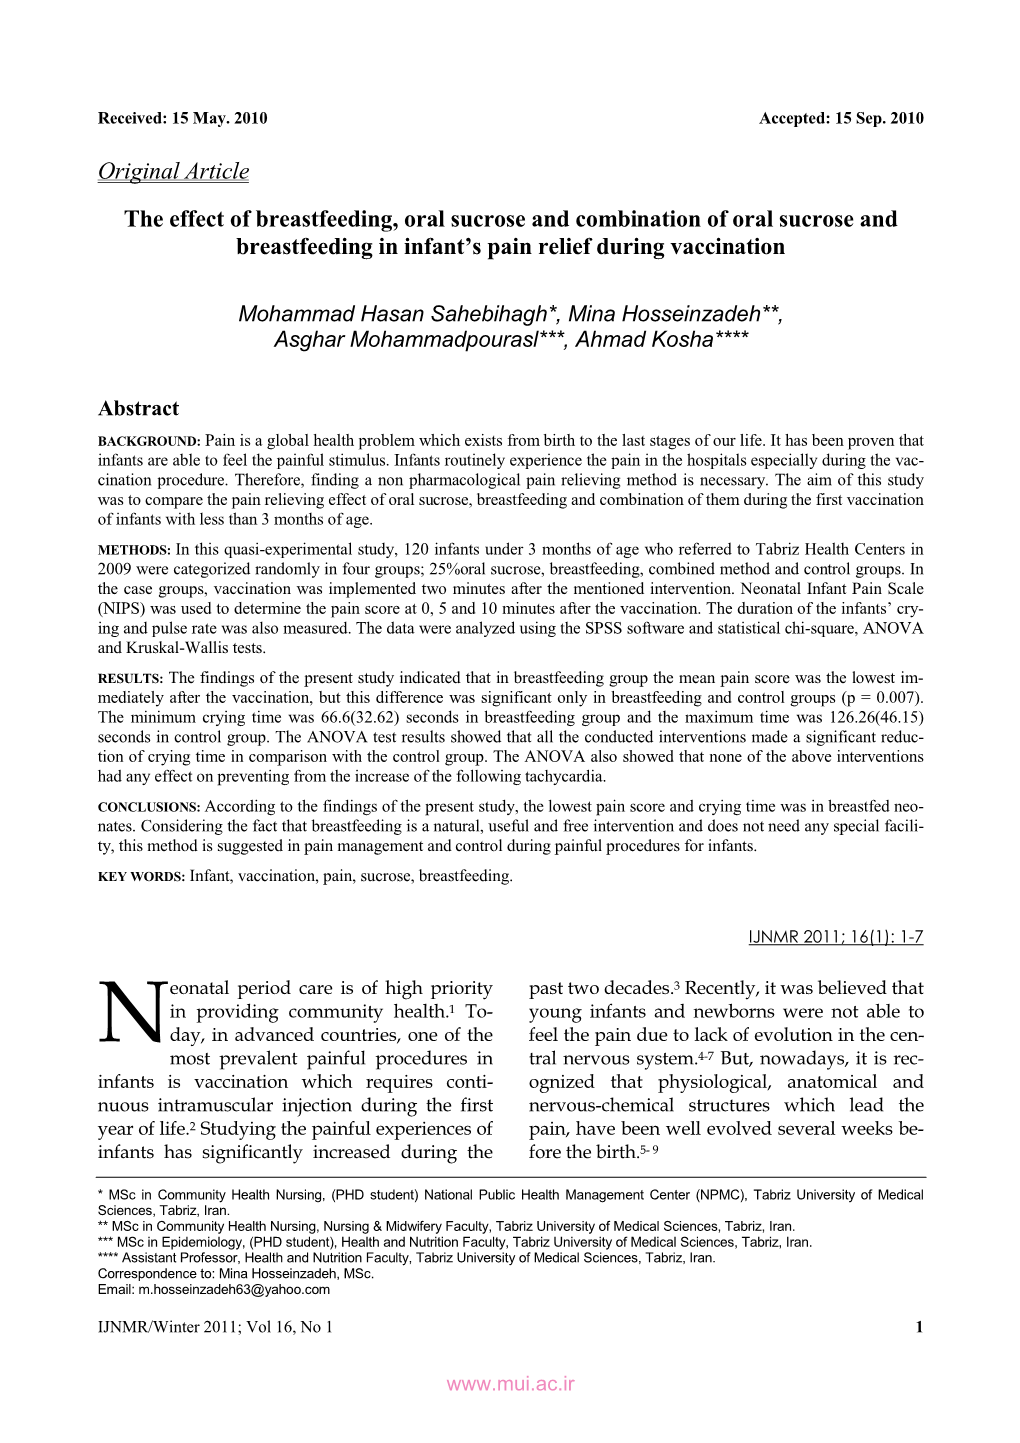 The Effect of Breastfeeding, Oral Sucrose and Combination of Oral Sucrose and Breastfeeding in Infant’S Pain Relief During Vaccination